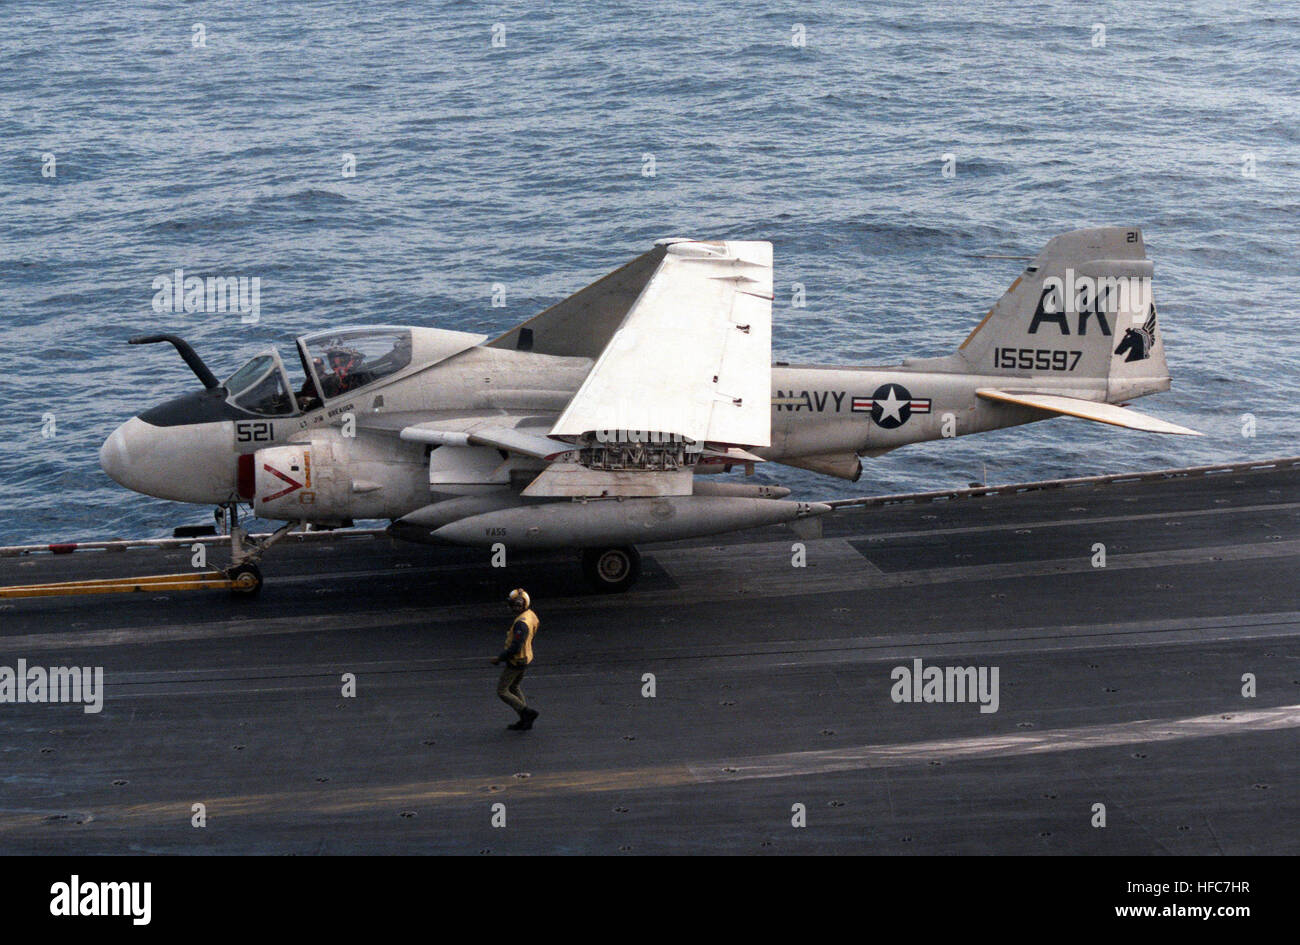 A KA-6D Intruder tanker aircraft from Attack Squadron 55 is towed along the  flight deck